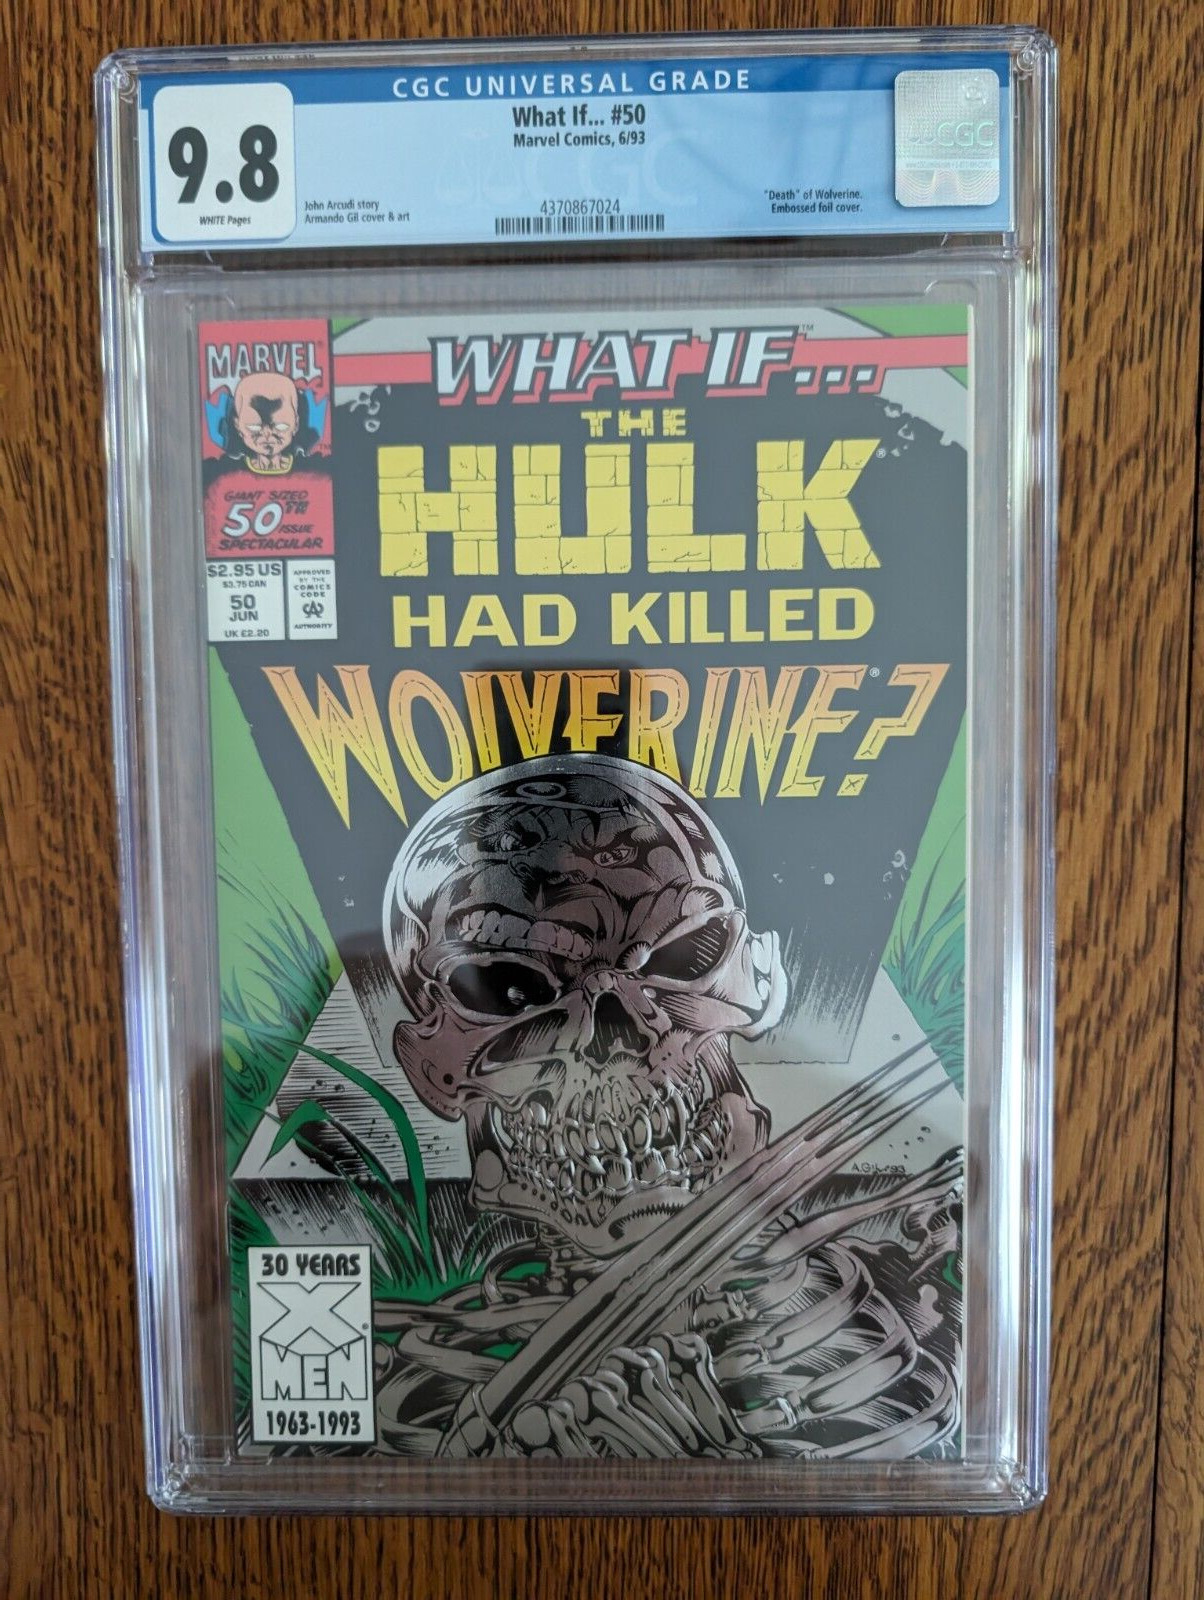 What If... #50, Hulk had killed Wolverine, Embossed Foil Cover, CGC 9.8